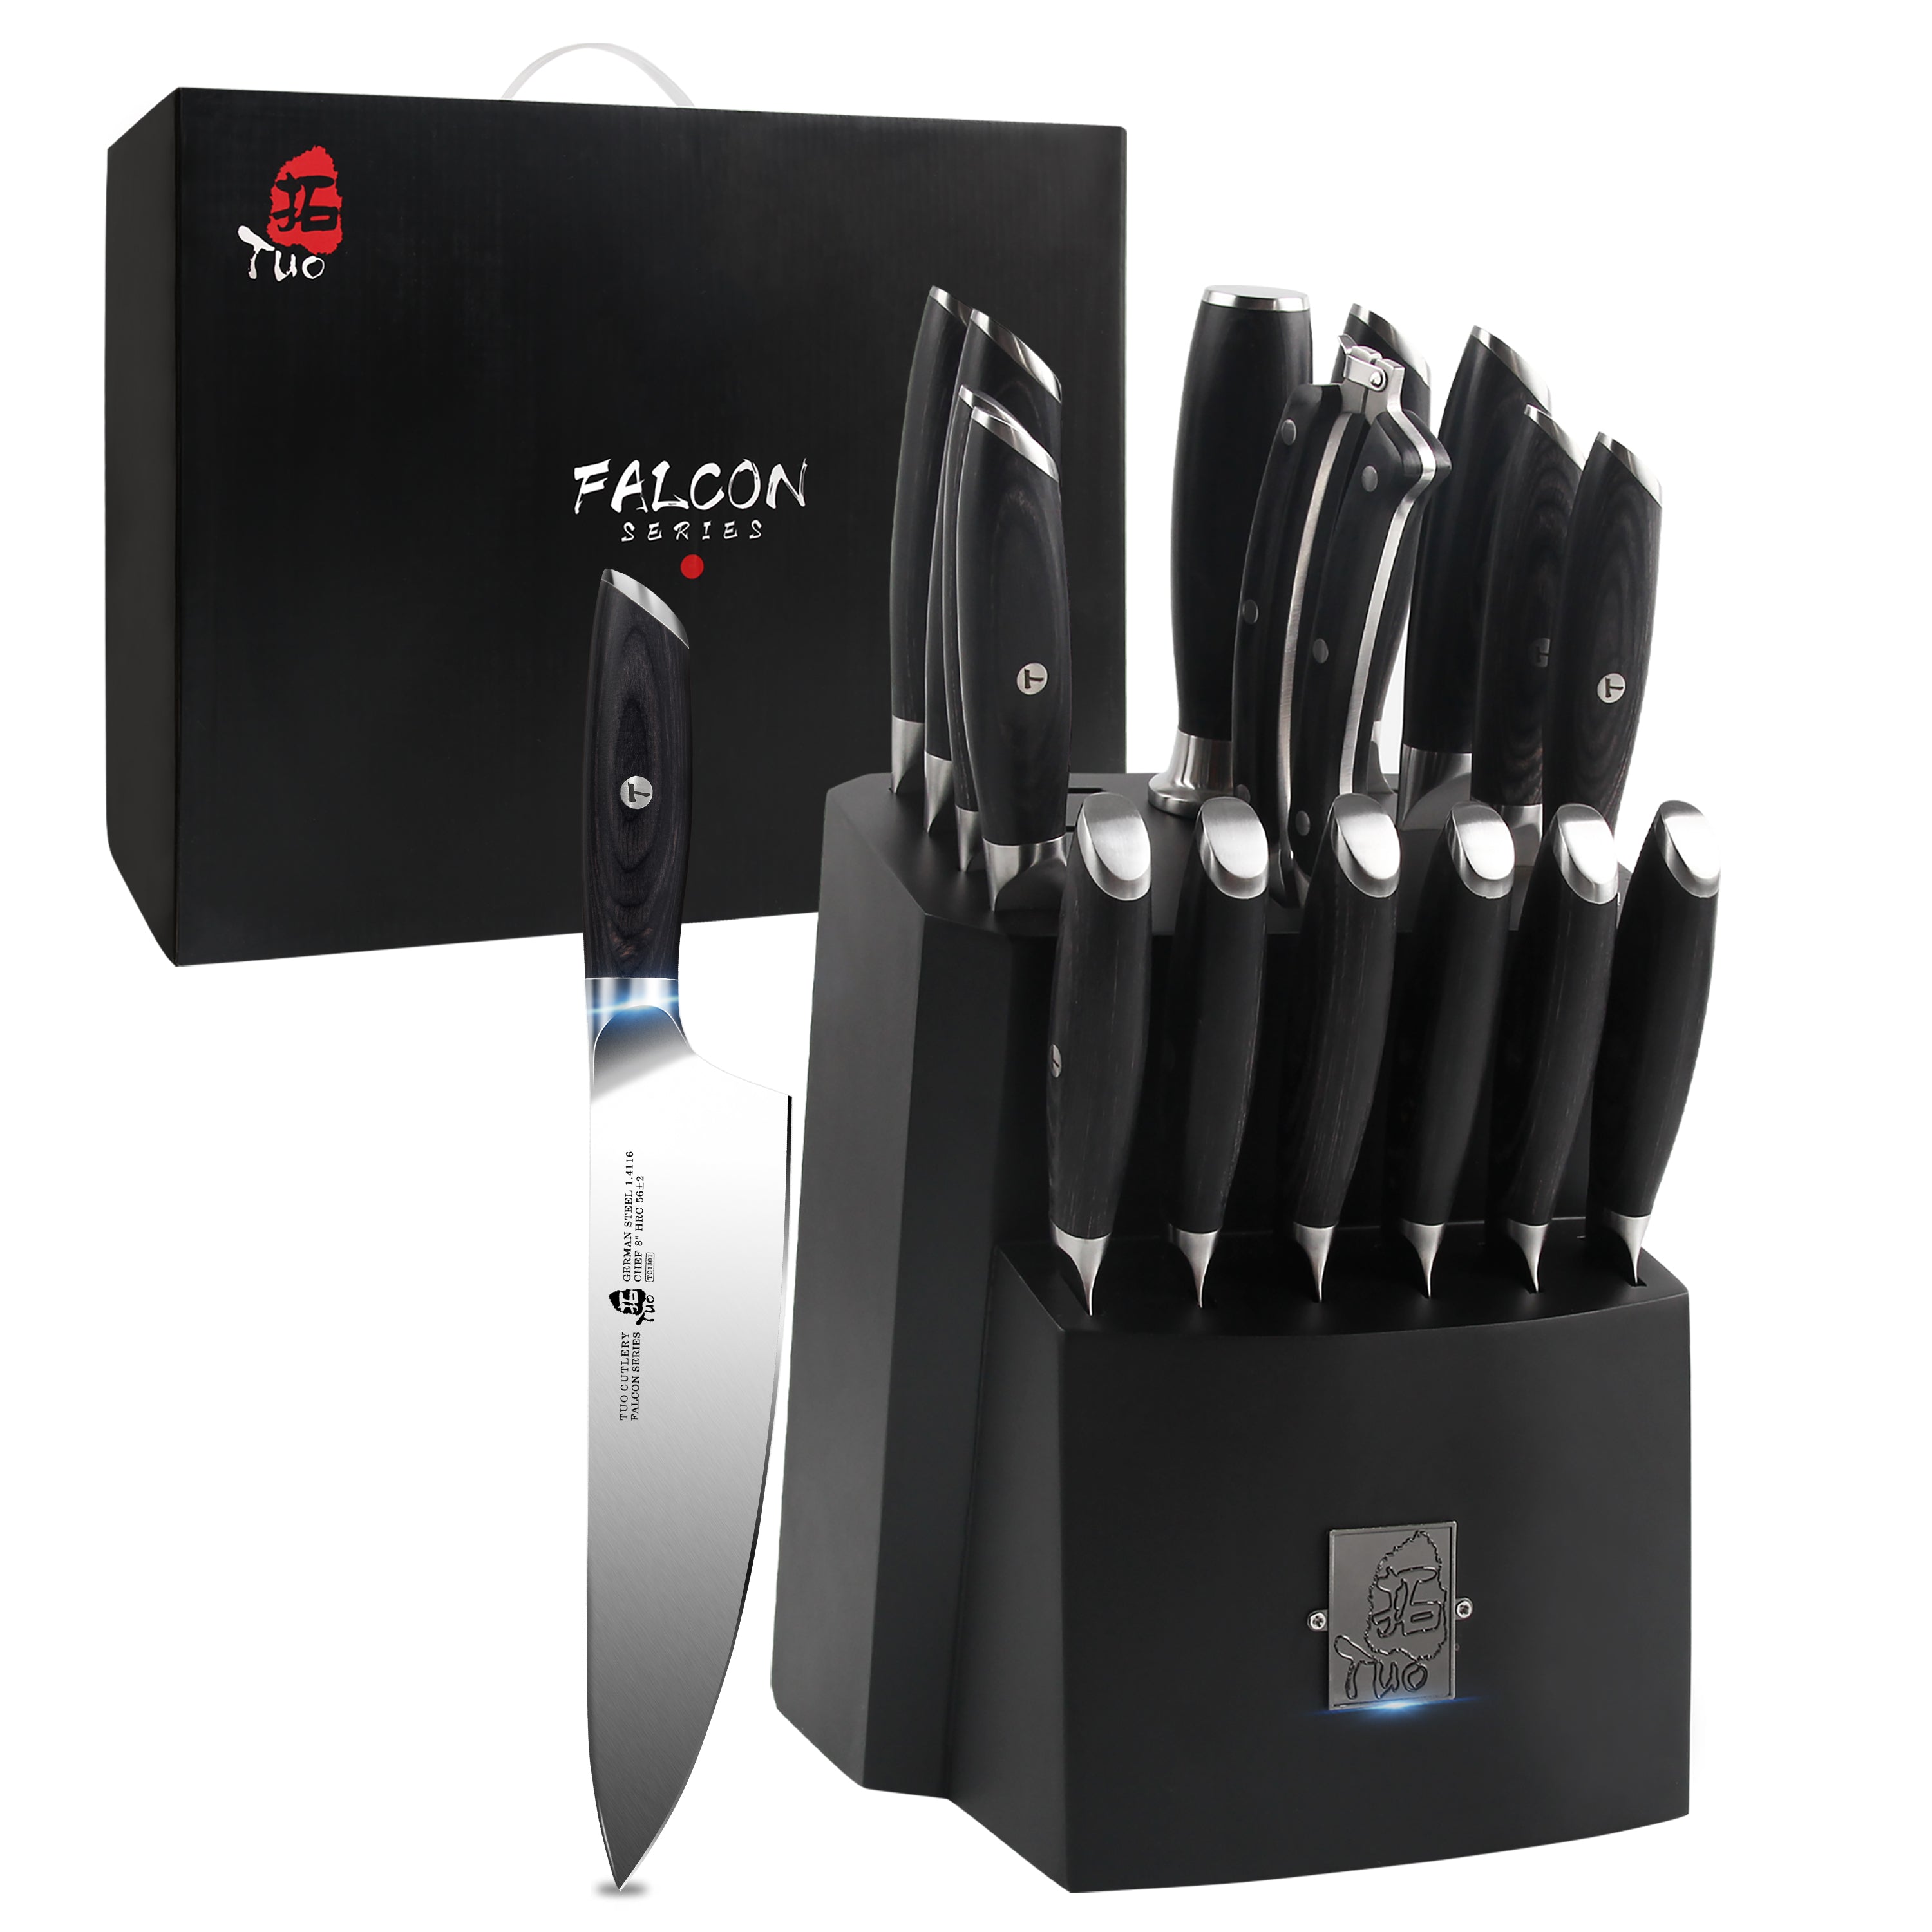 Knife Within A Knife - Stainless Steel Nesting Cooking Knife Set